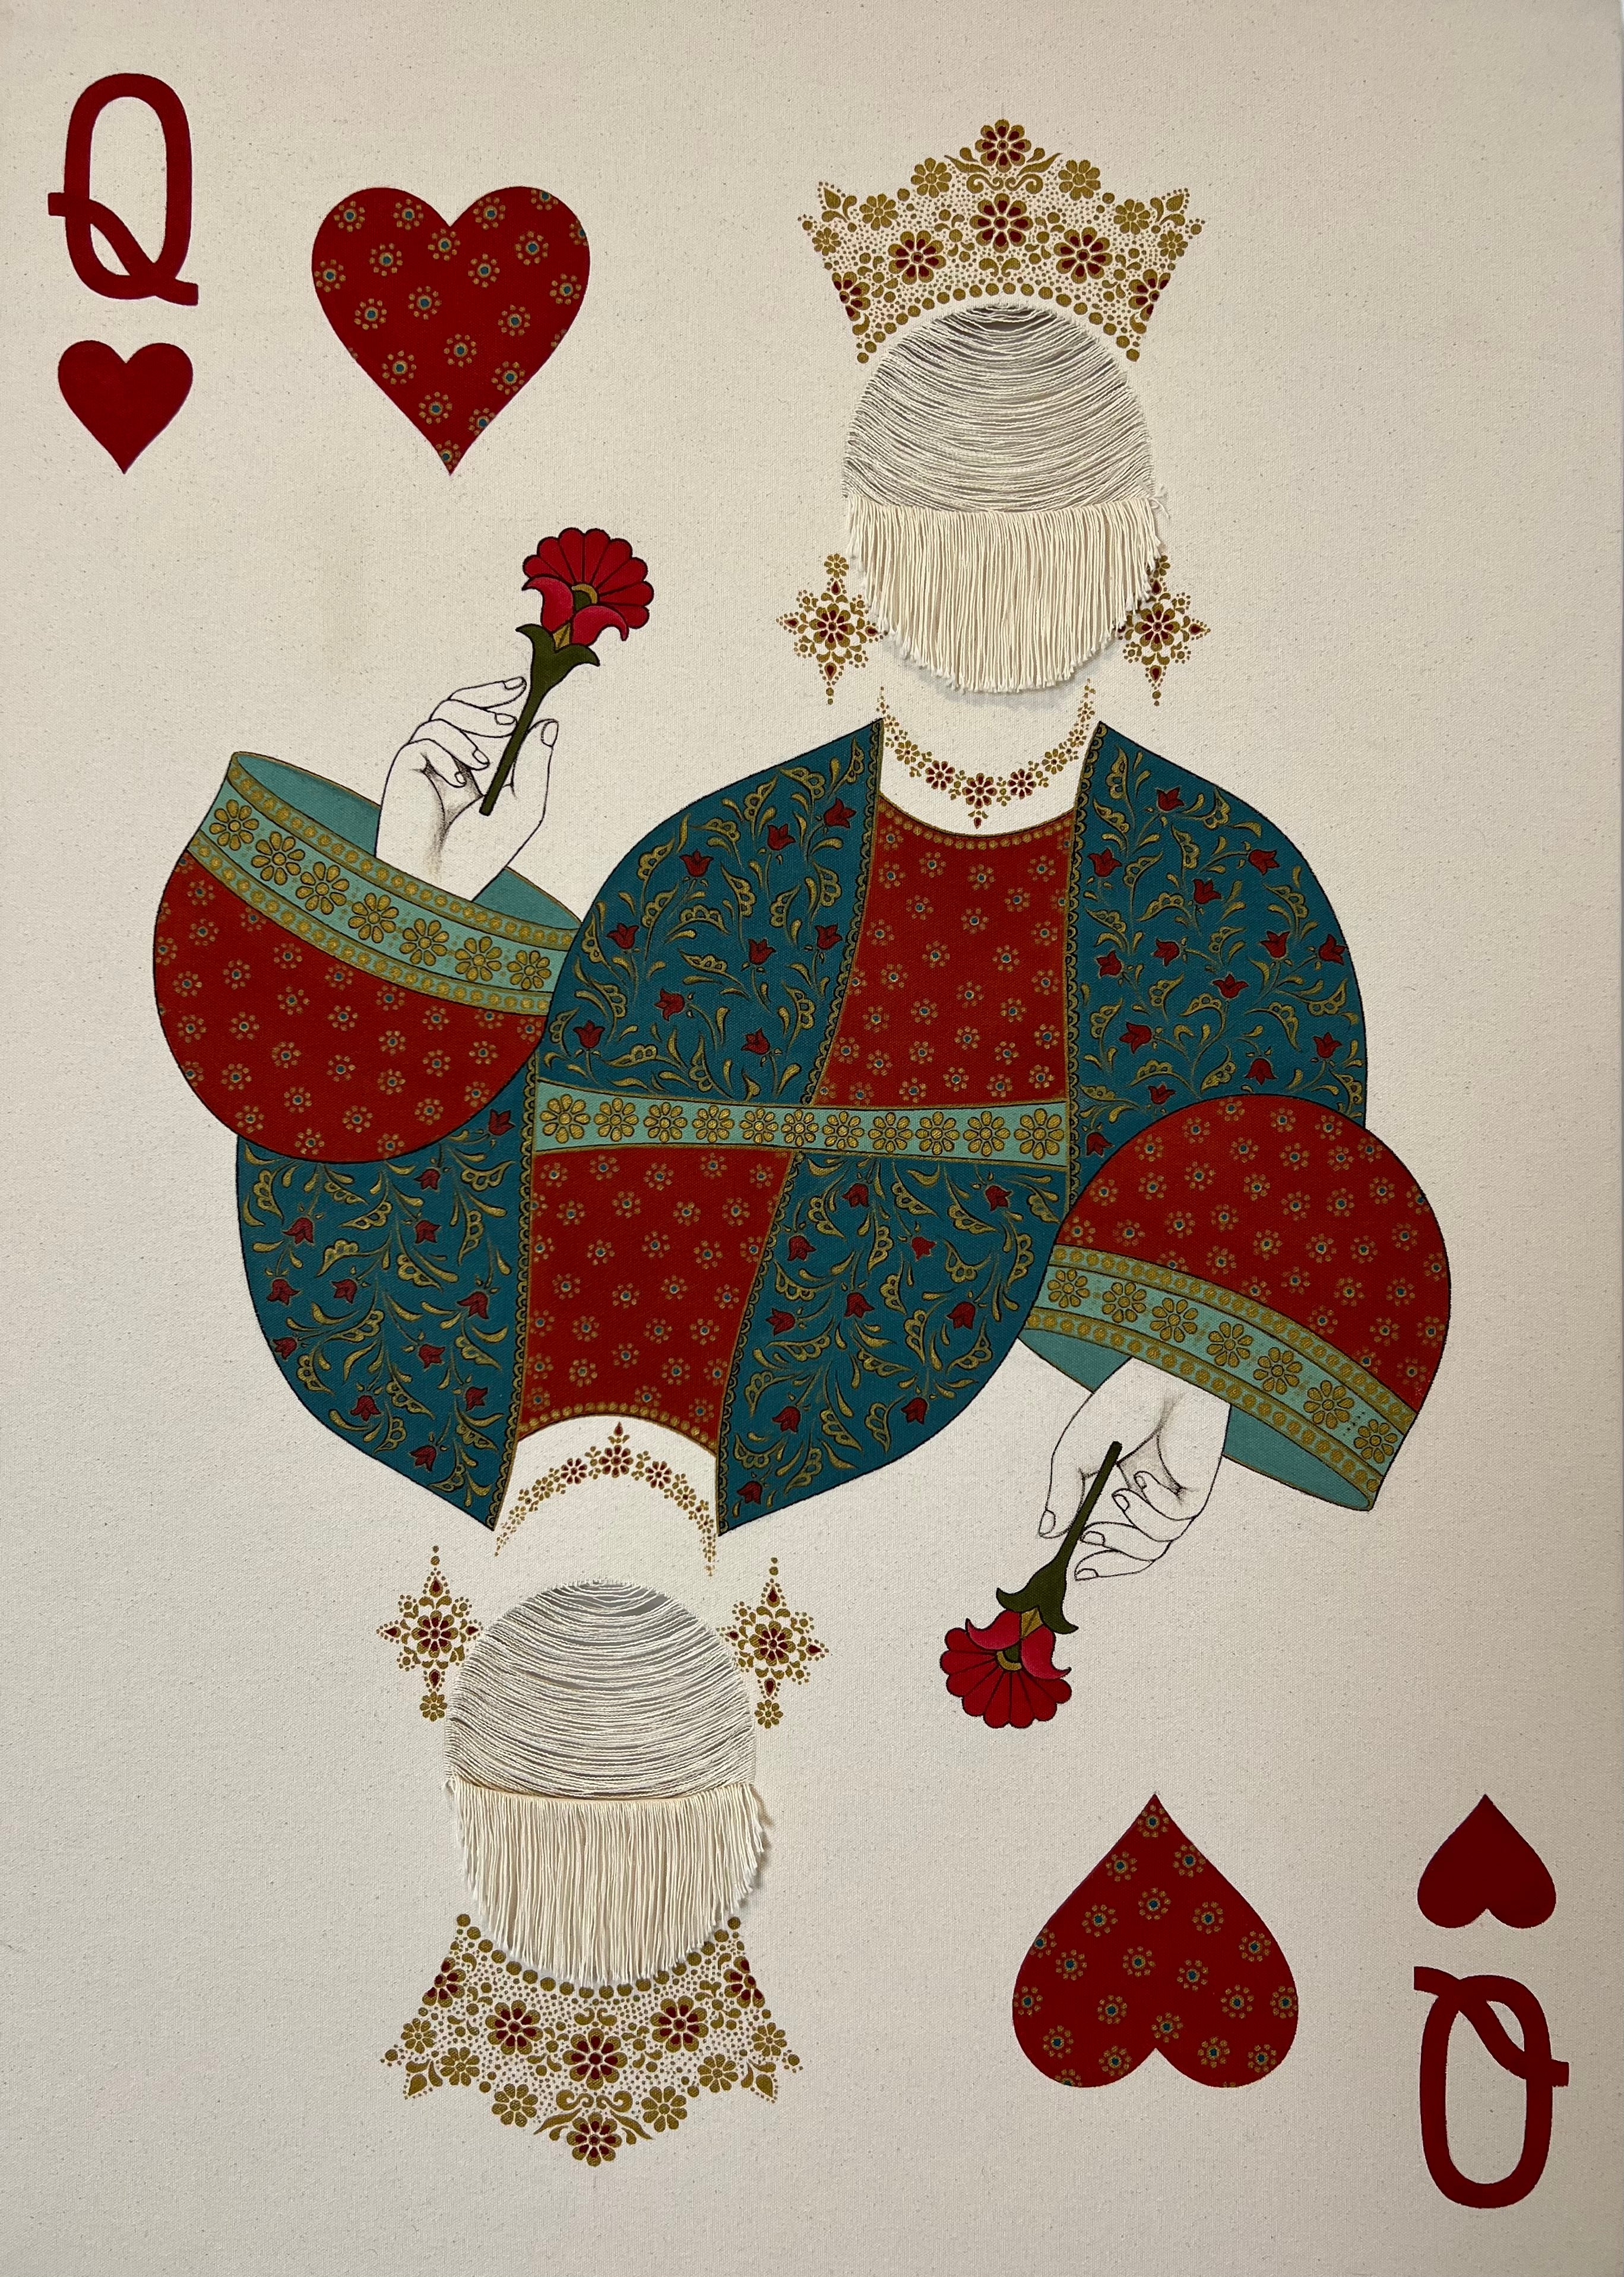 'QUEEN OF HEARTS' - Acrylic on Canvas